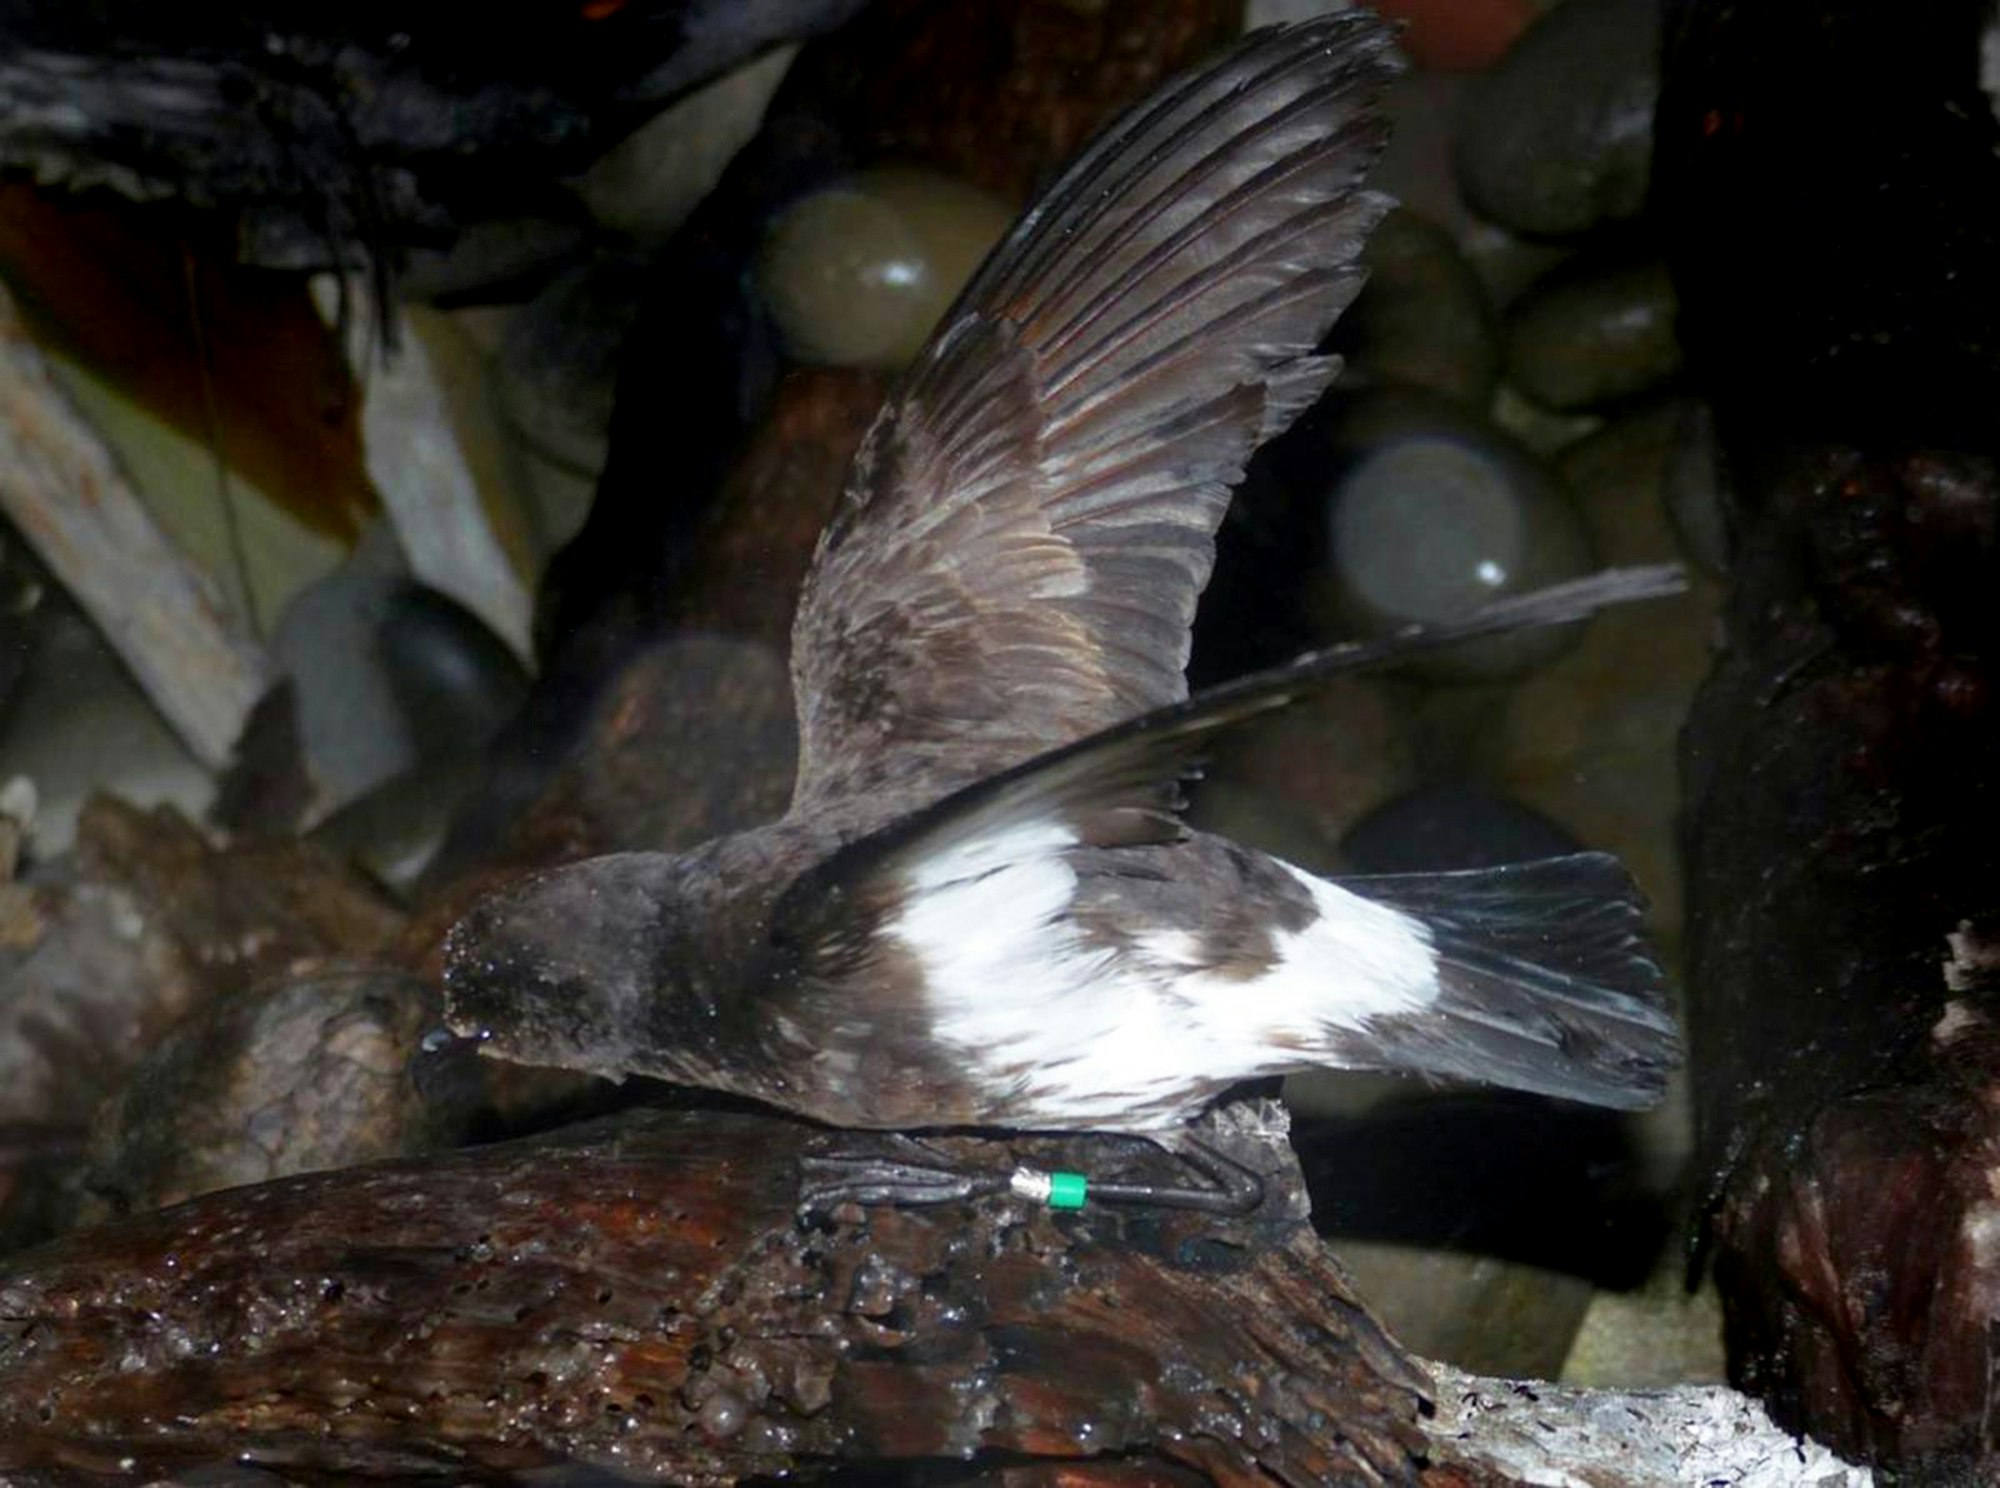 A bird in a dark cave with its wings up